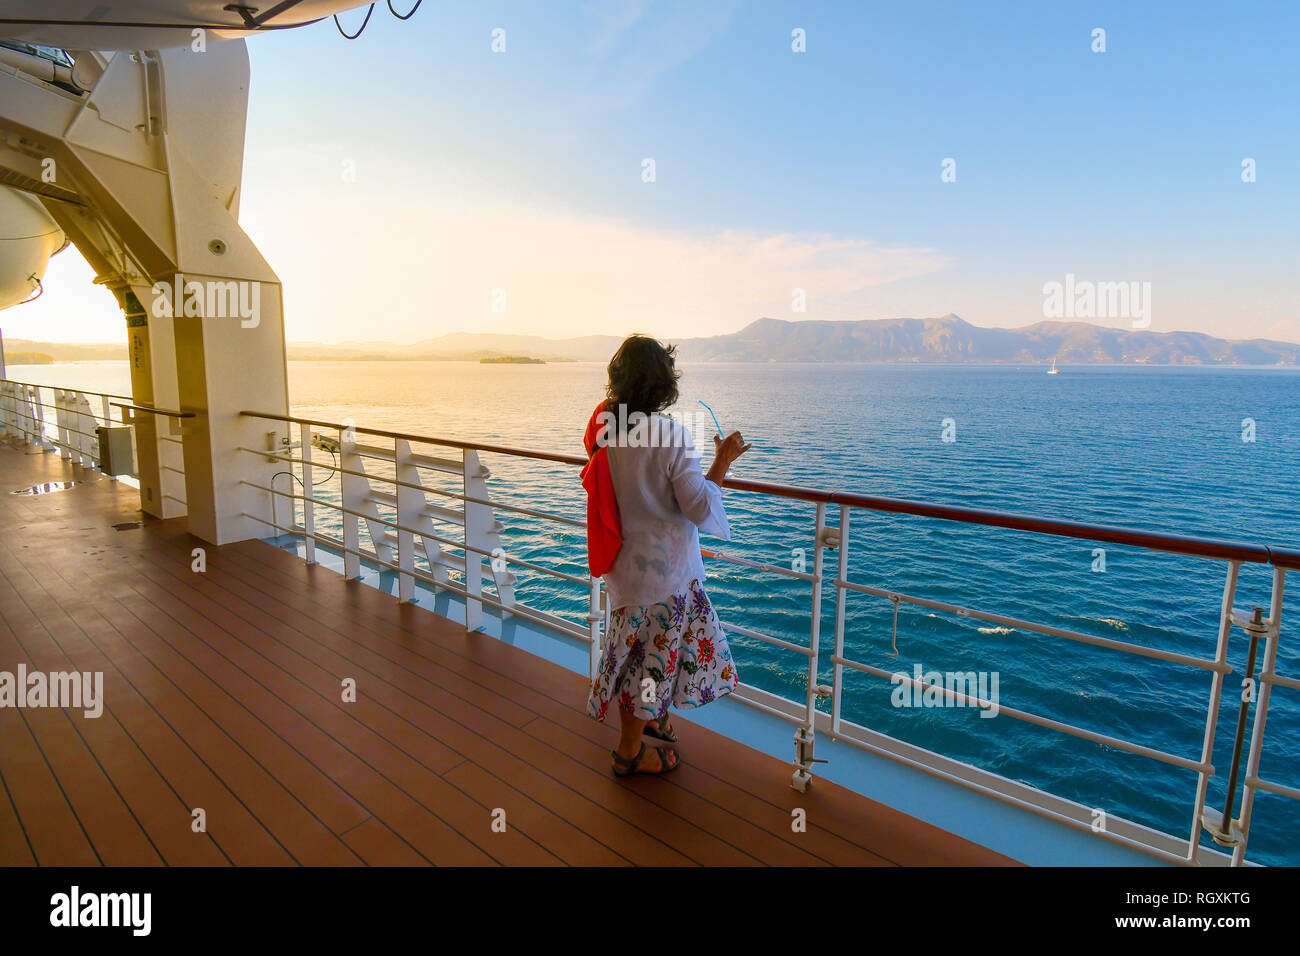 A woman sips a drink on the deck of a cruise ship as the sun sets and the ship passes islands on the Aegean Sea Stock Photo